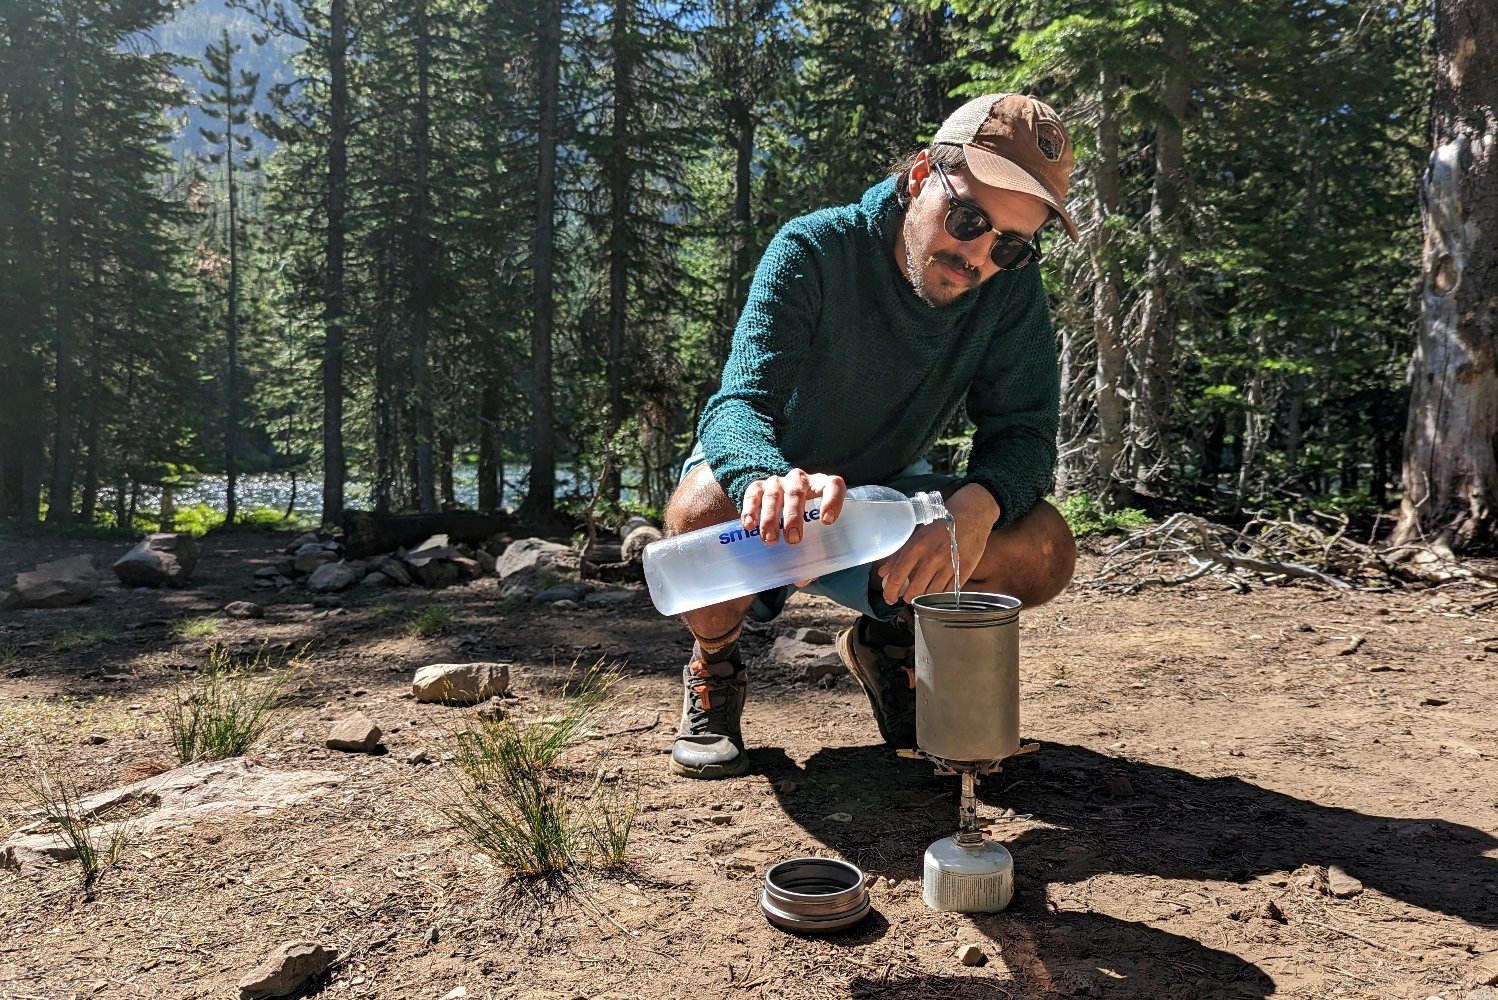 A hiker pouring water into a cookpot on top of the SOTO Windmaster stove - hes in a campsite surrounded by pine trees with a lake in the background